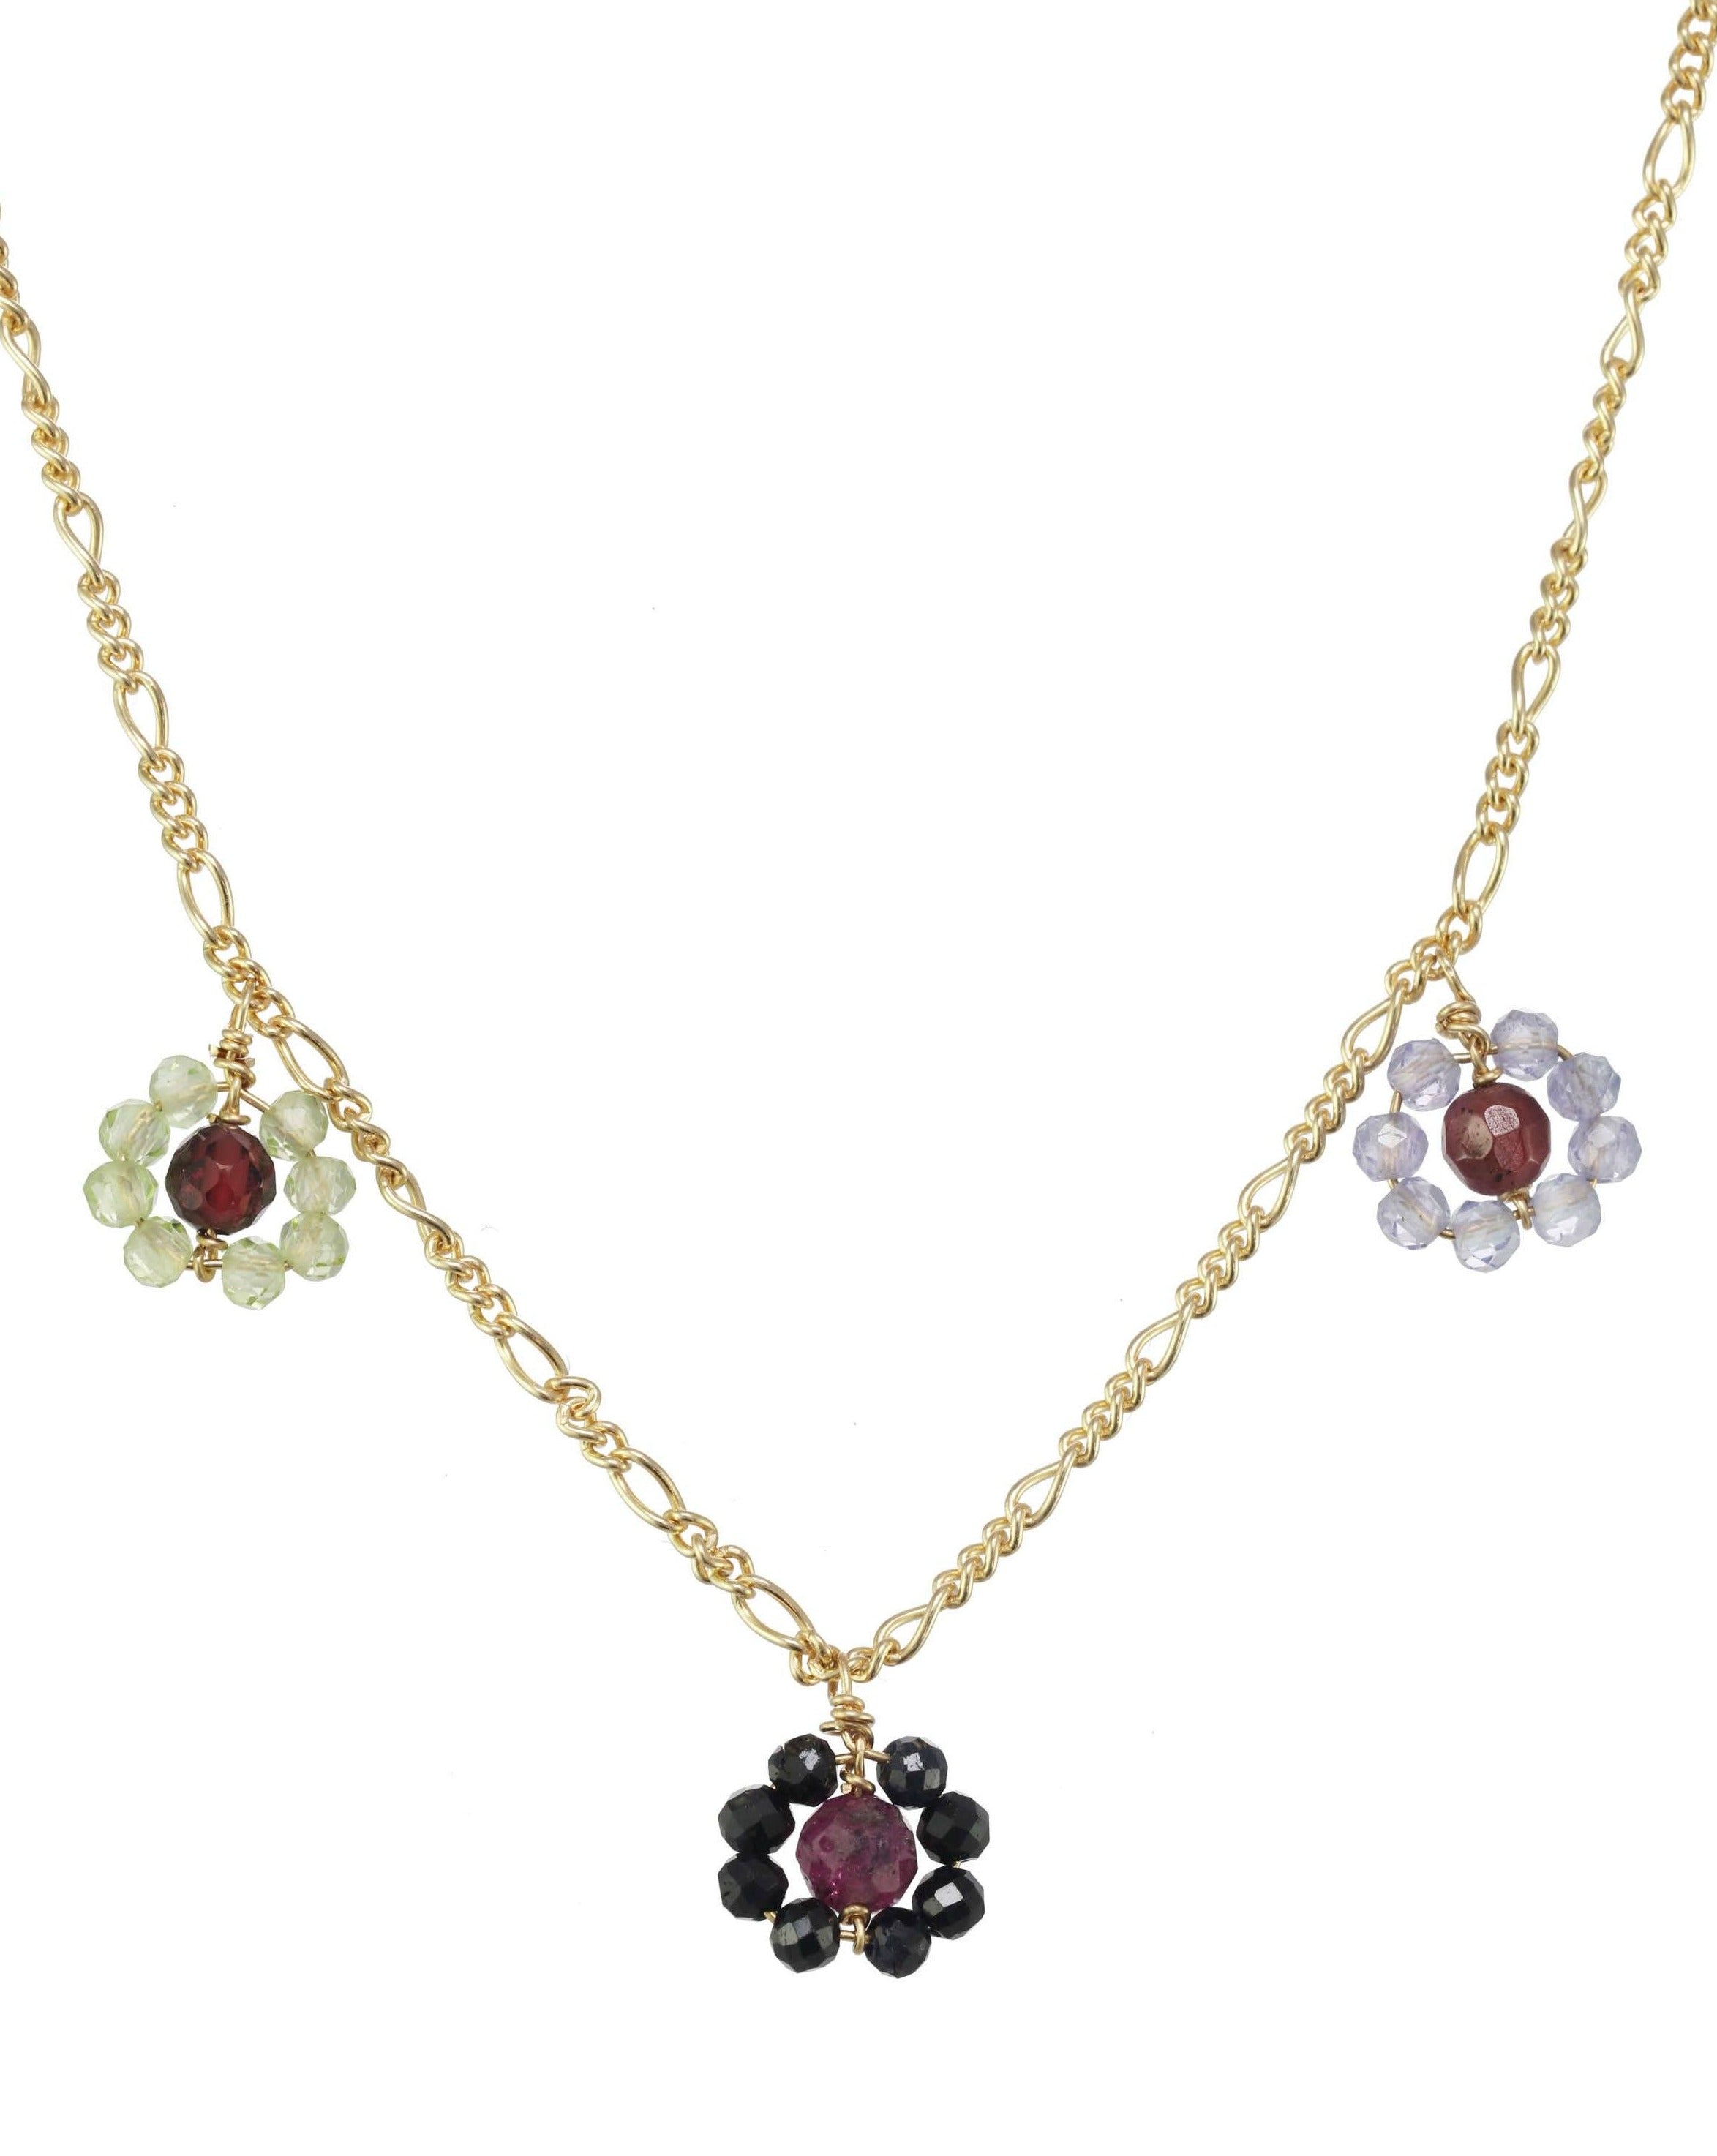 Montanita Necklace by KOZAKH. A 16 to 18 inch adjustable length necklace, crafted in 14K Gold Filled, featuring 2mm Sapphire, Tanzanite and Peridot and 3mm Ruby and Garnet forming flower charms.